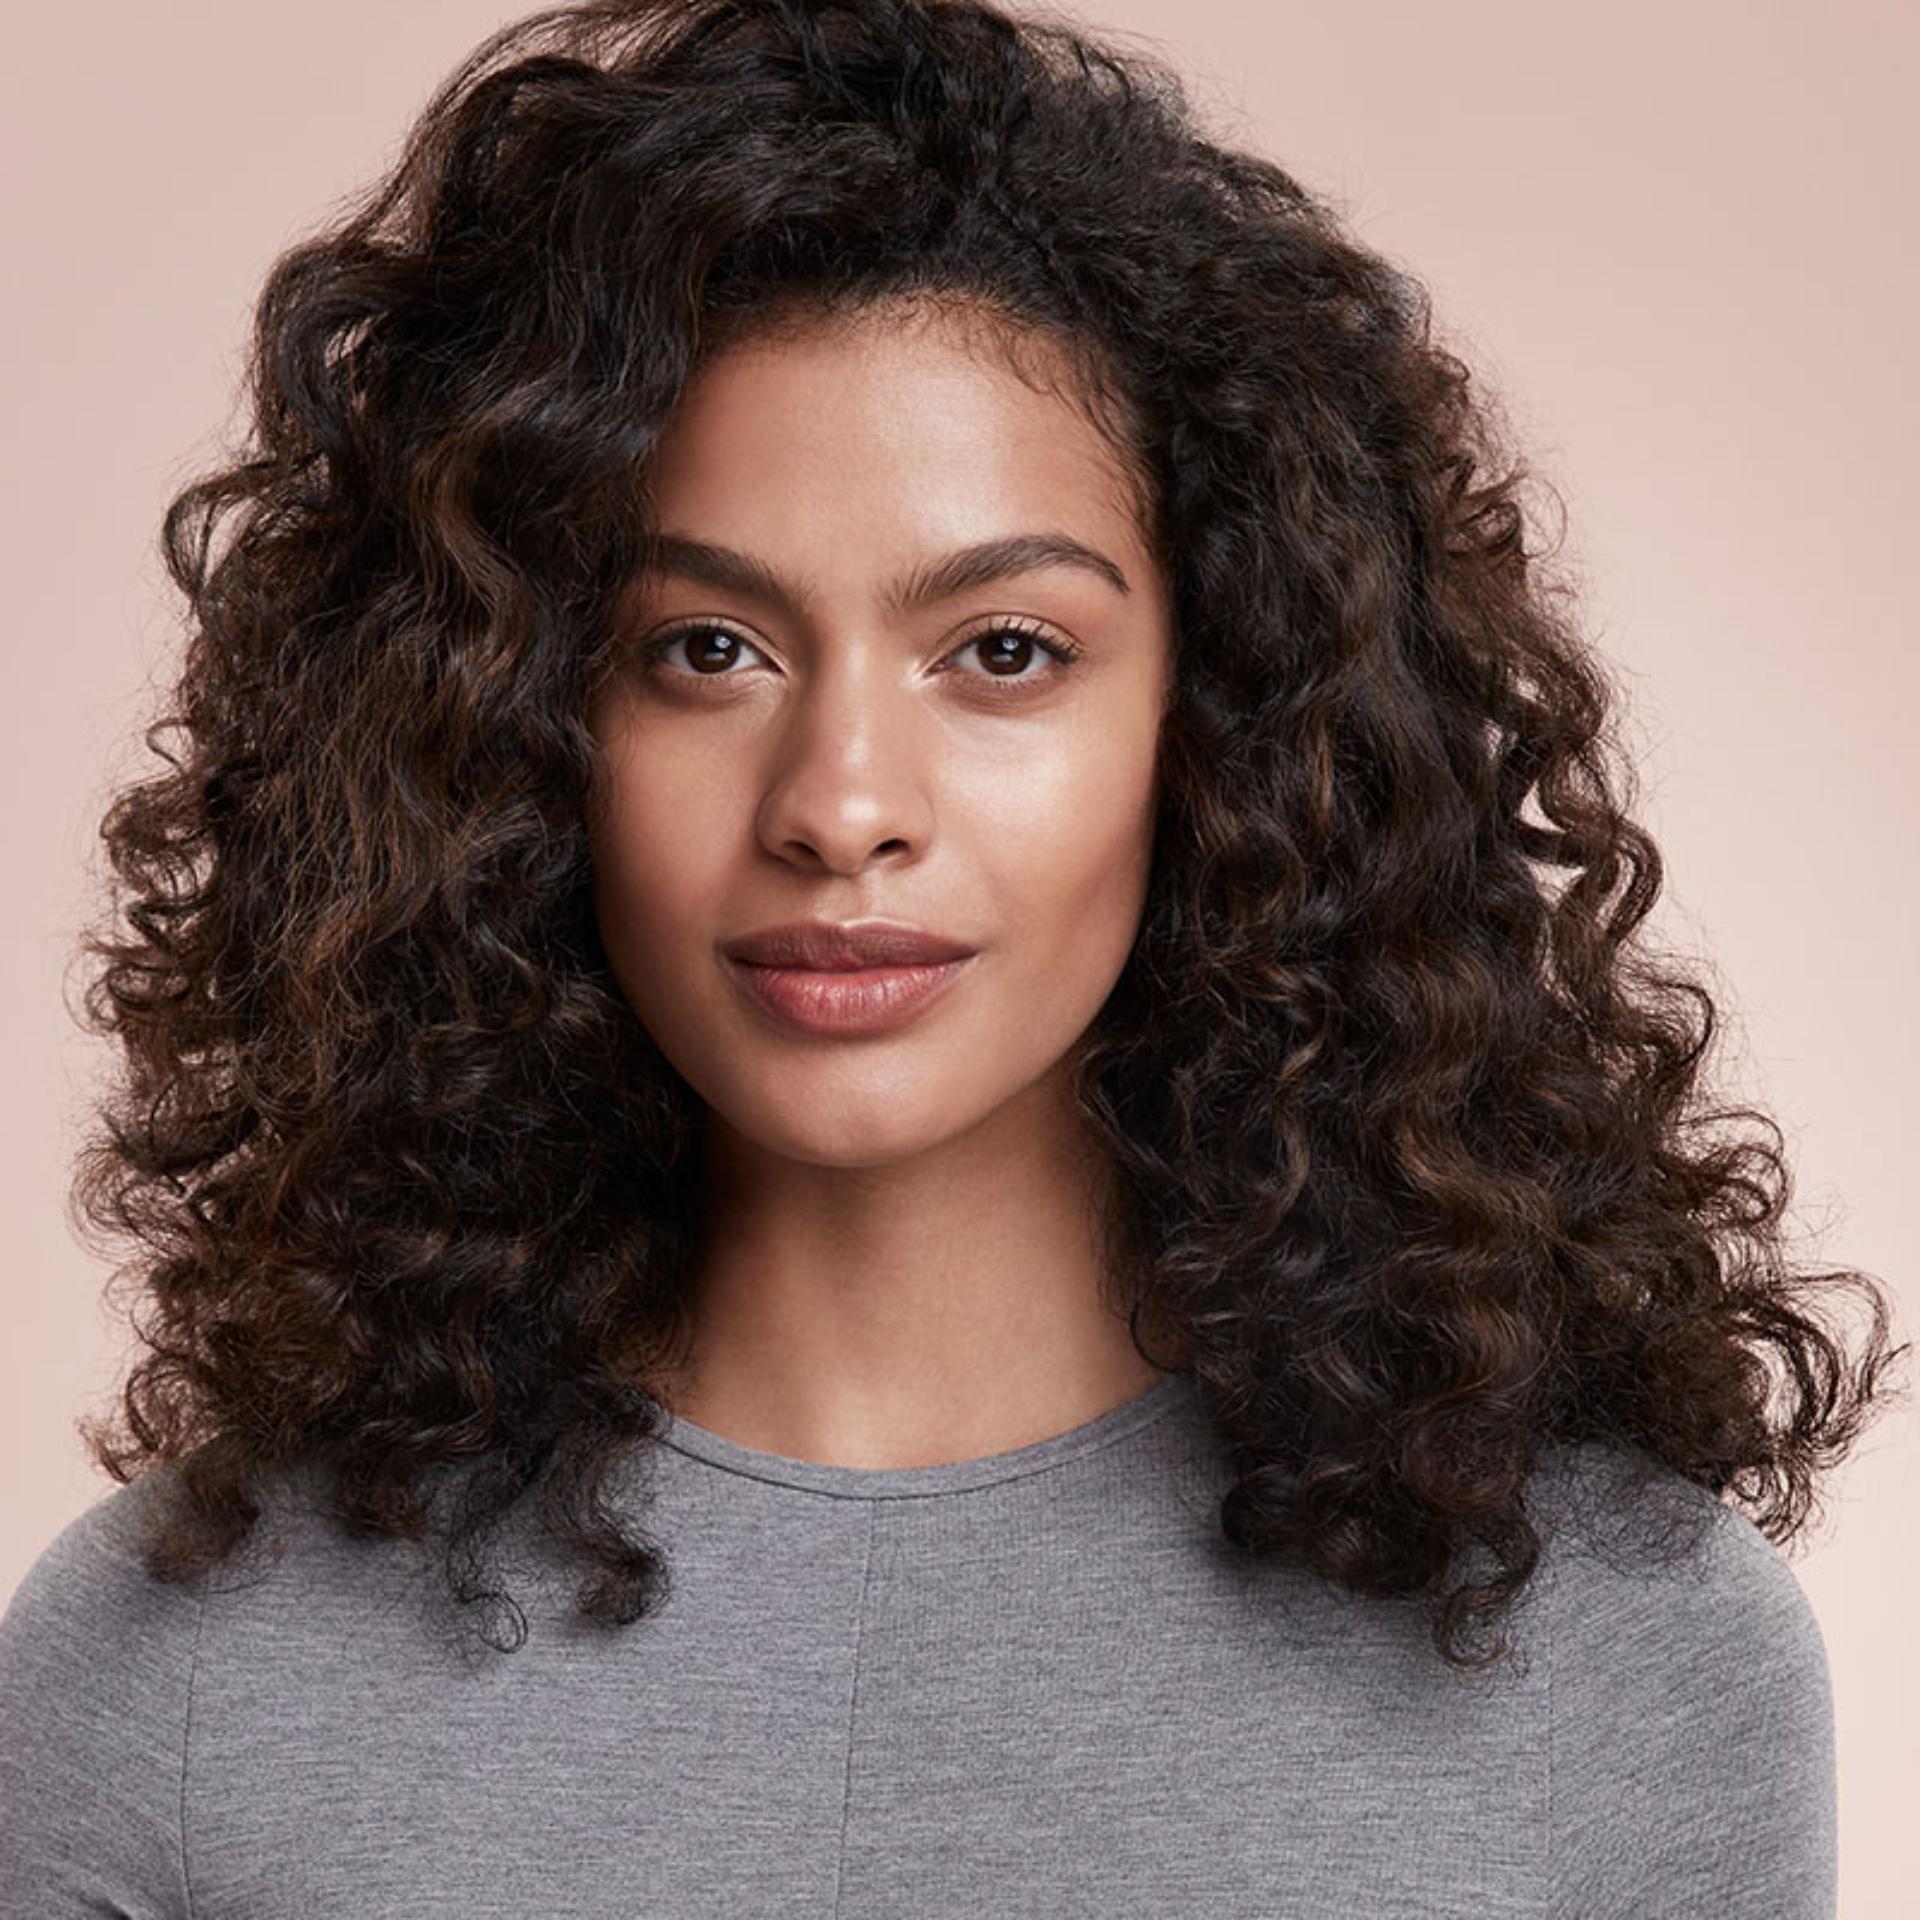 Model with defined curls using he Dyson Supersonic hair dryer